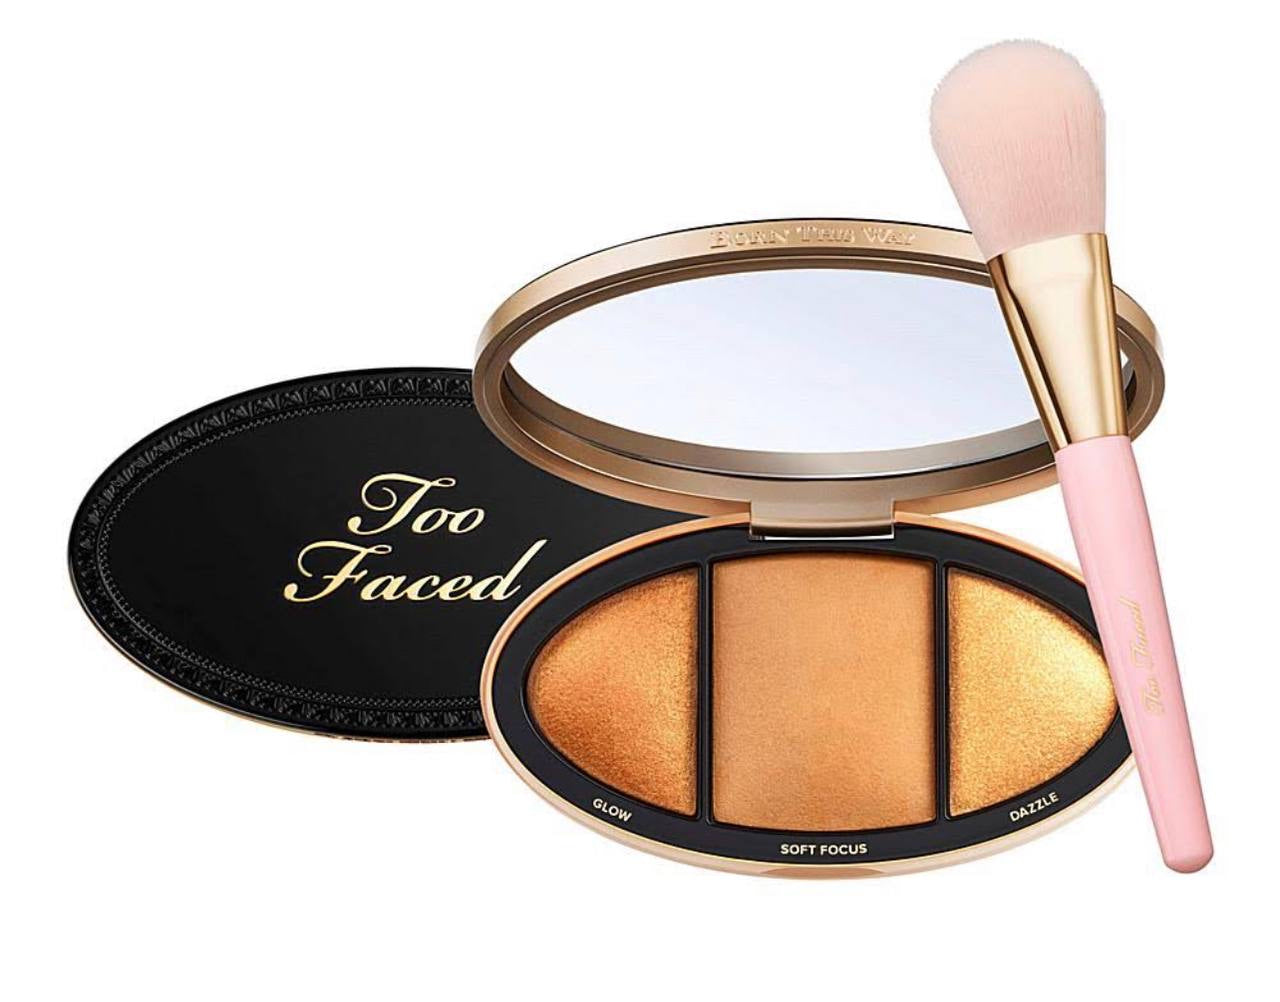 Too faced bronzer